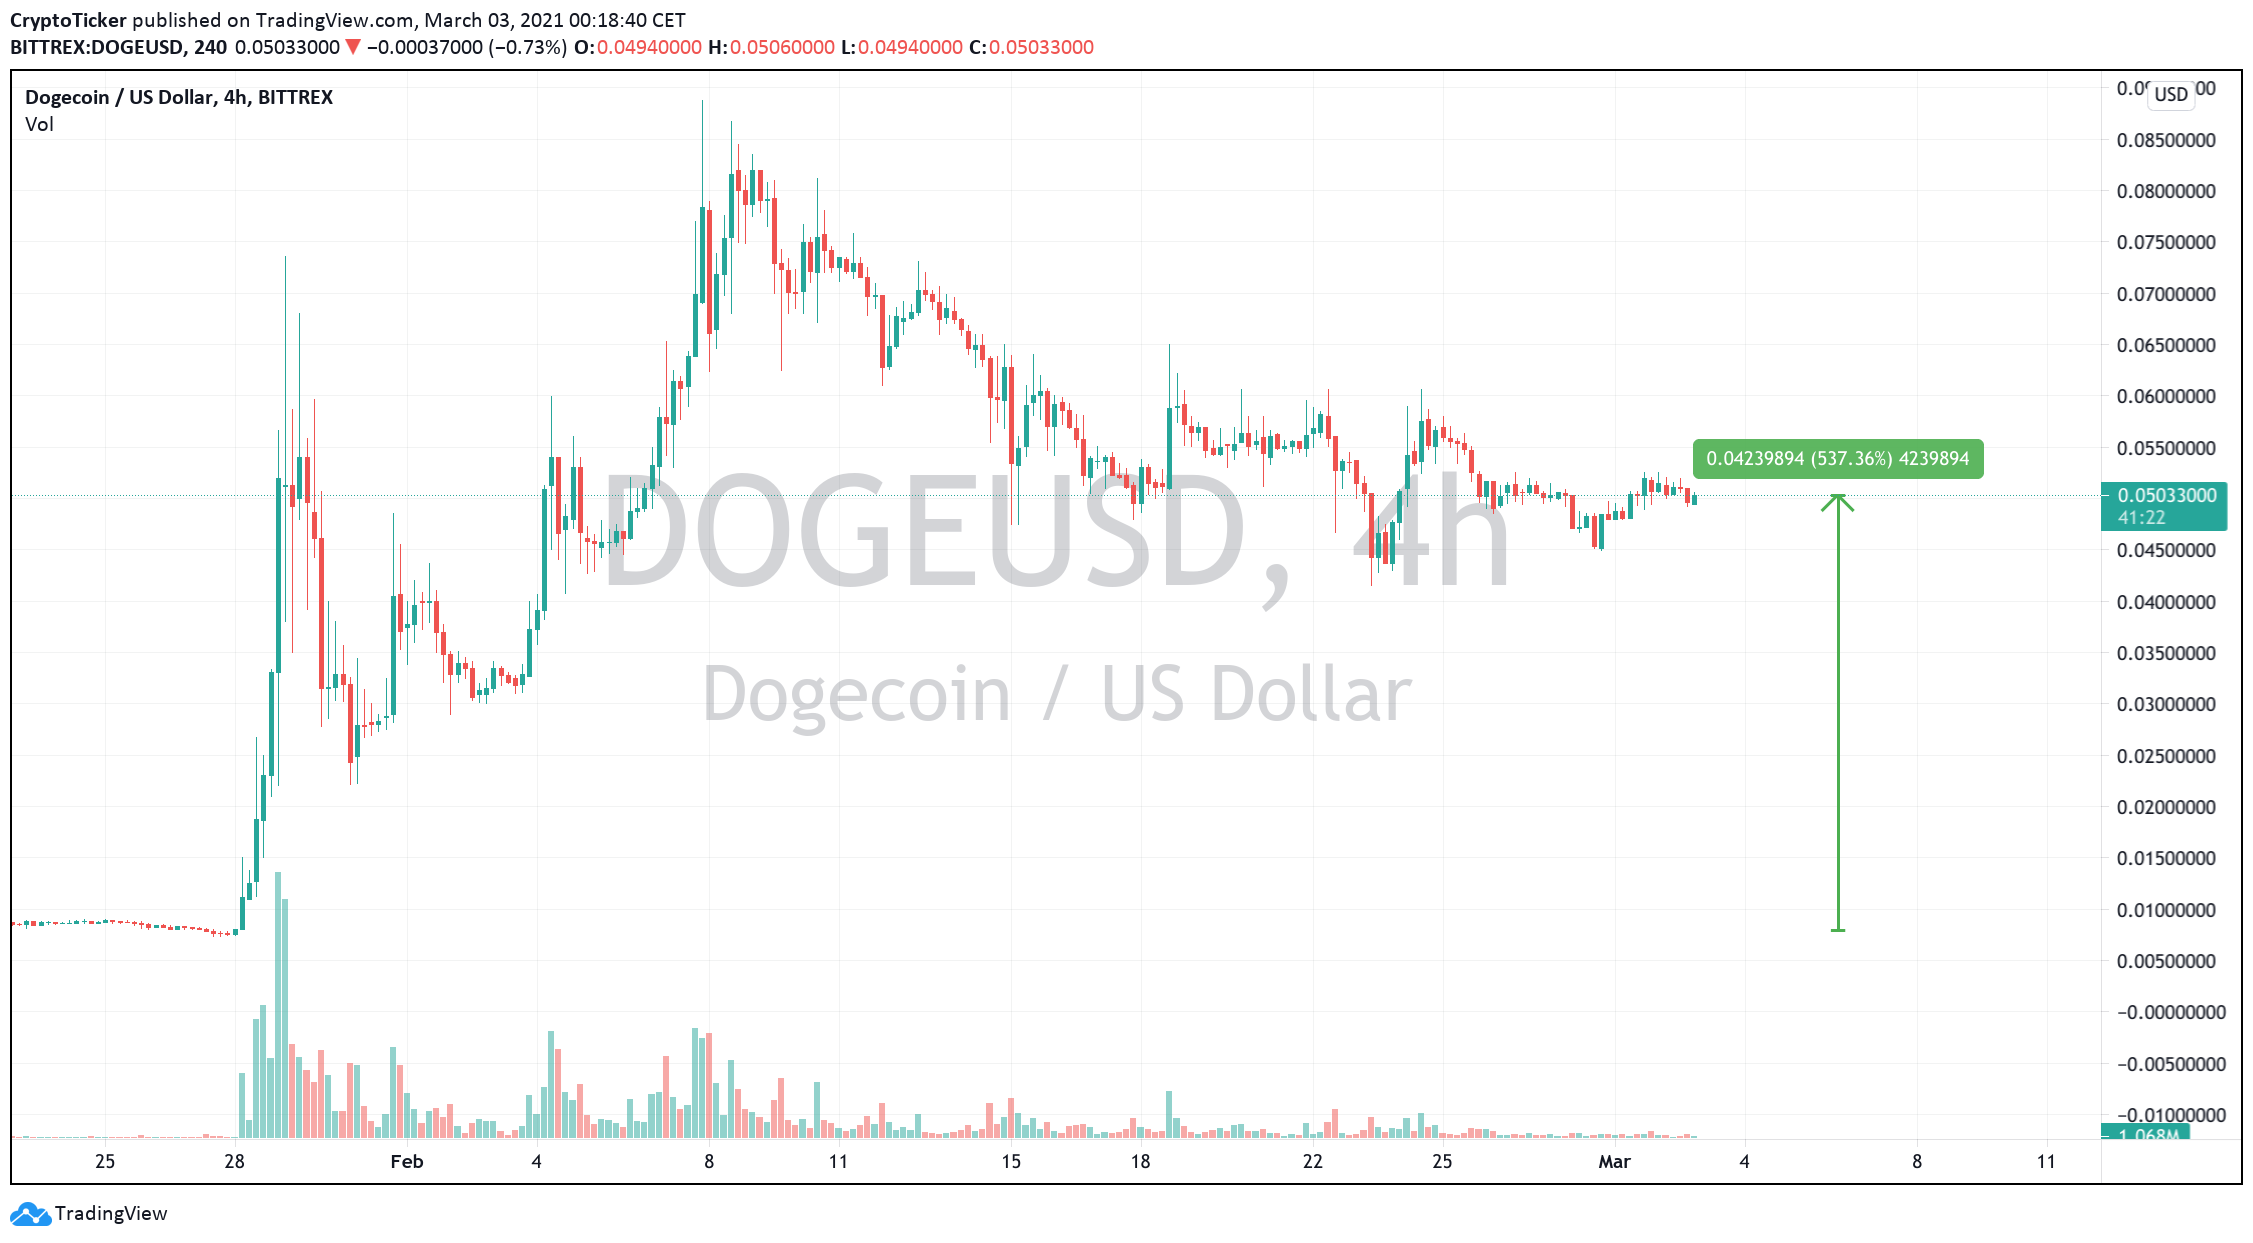 DOGE/USD 4-hour chart showing significant price increases thanks to Elon's Tweets